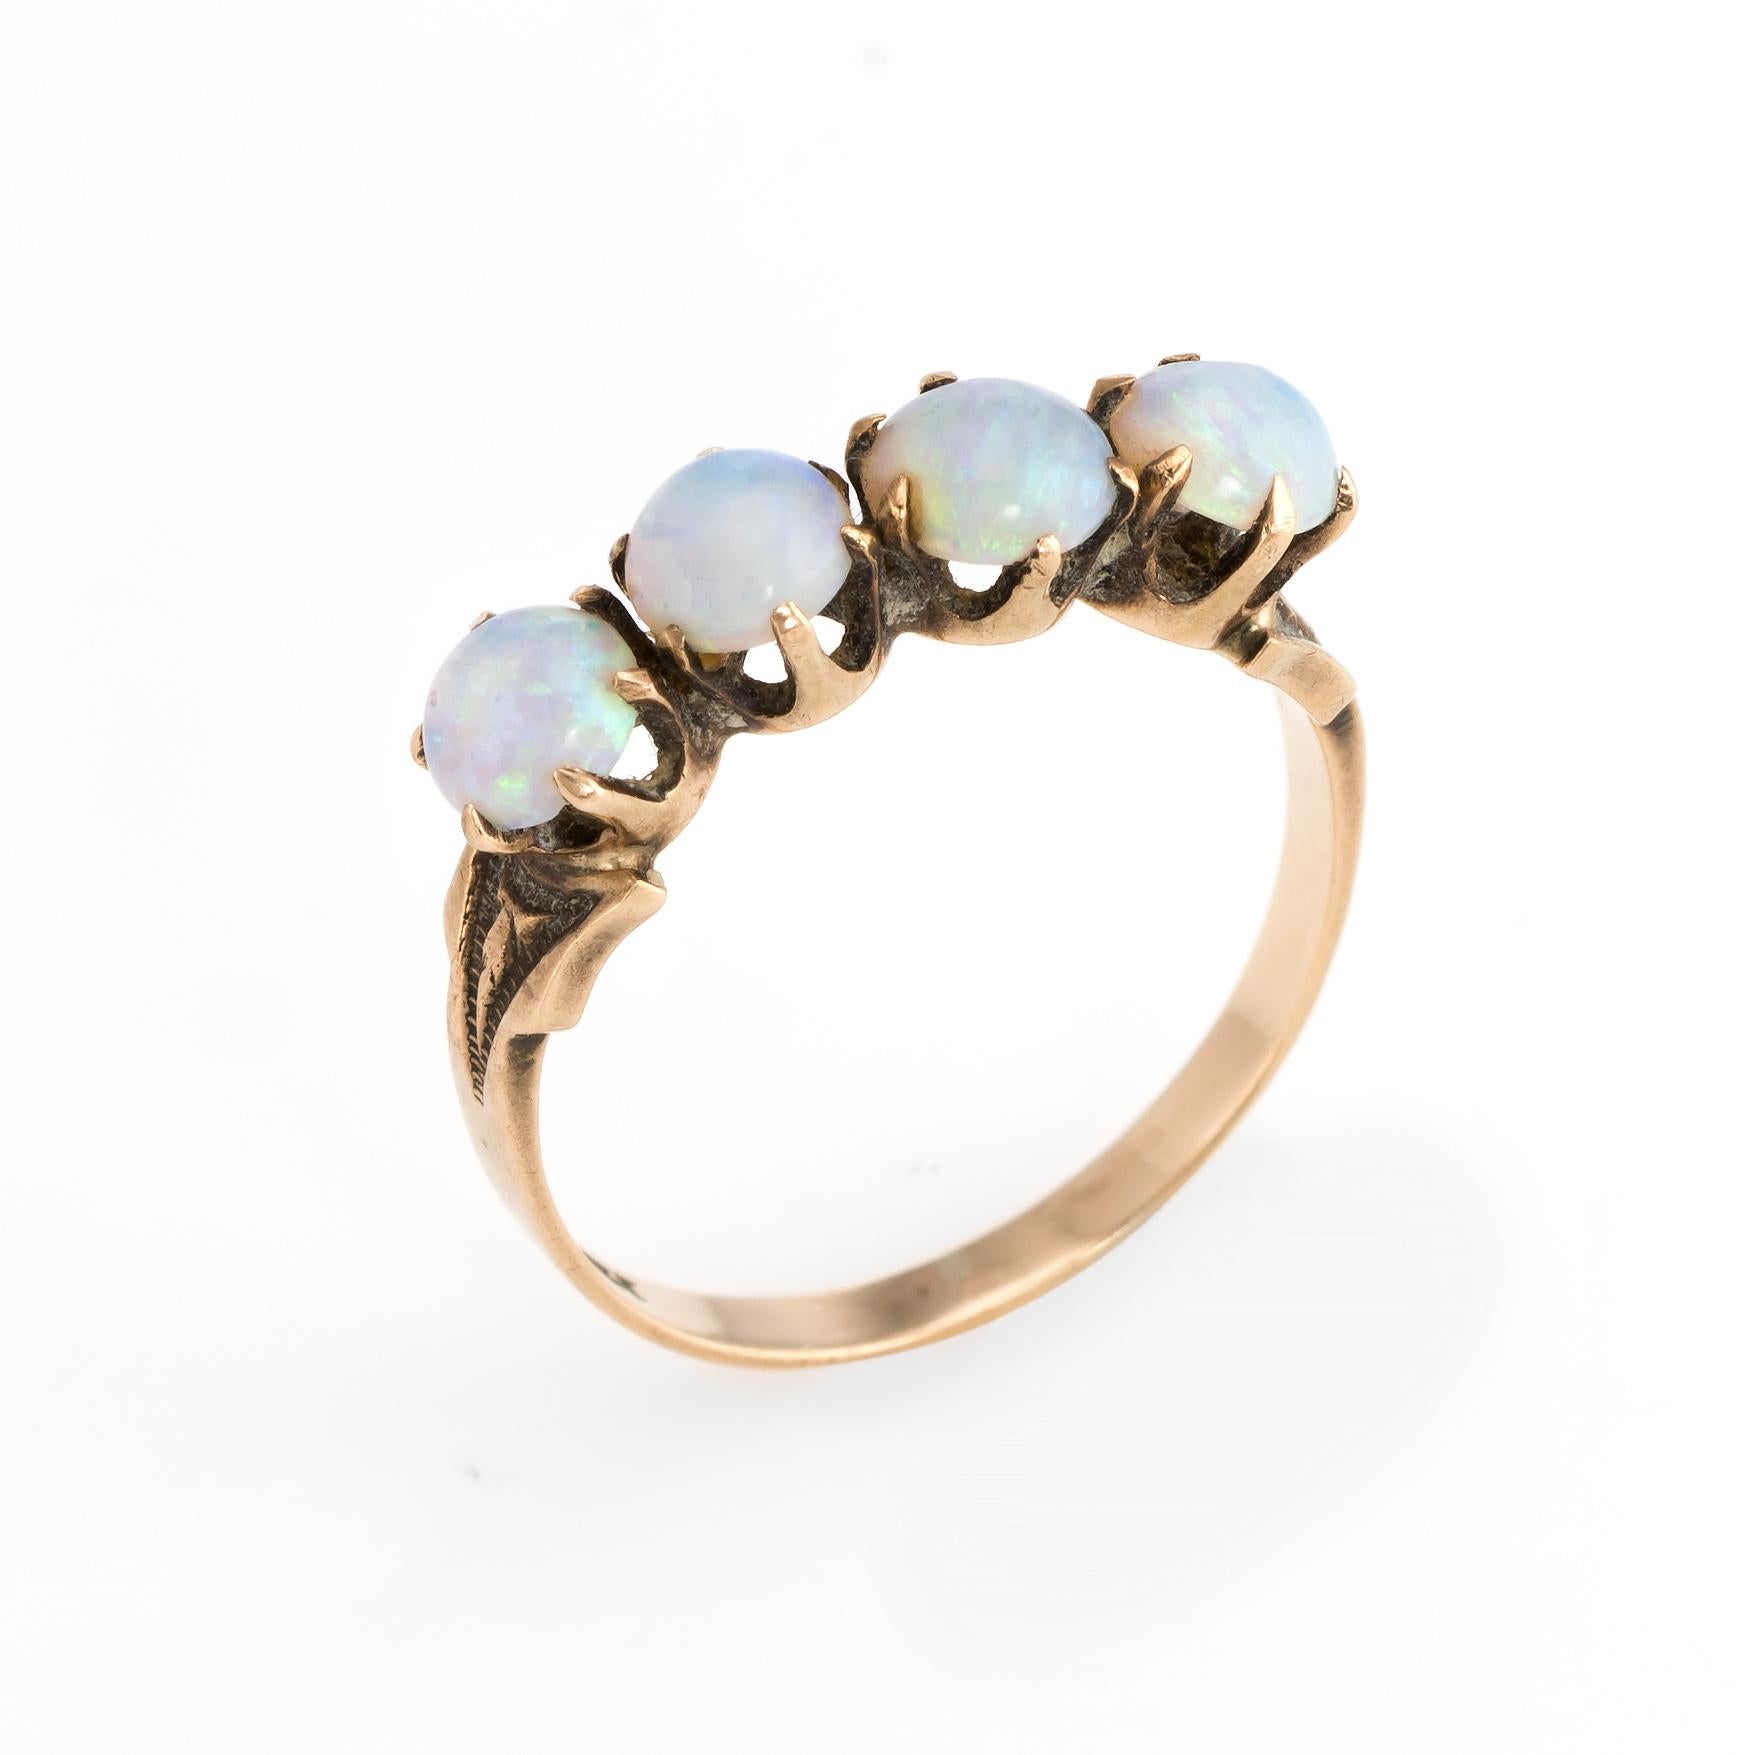 Finely detailed antique Victorian 4 stone opal ring (circa 1880s to 1900s), crafted in 10 karat rose gold. 

Natural opals each measure 4.5mm (estimated at 0.40 carats each - 1.60 carats total estimated weight). Note: slight chip to one opal